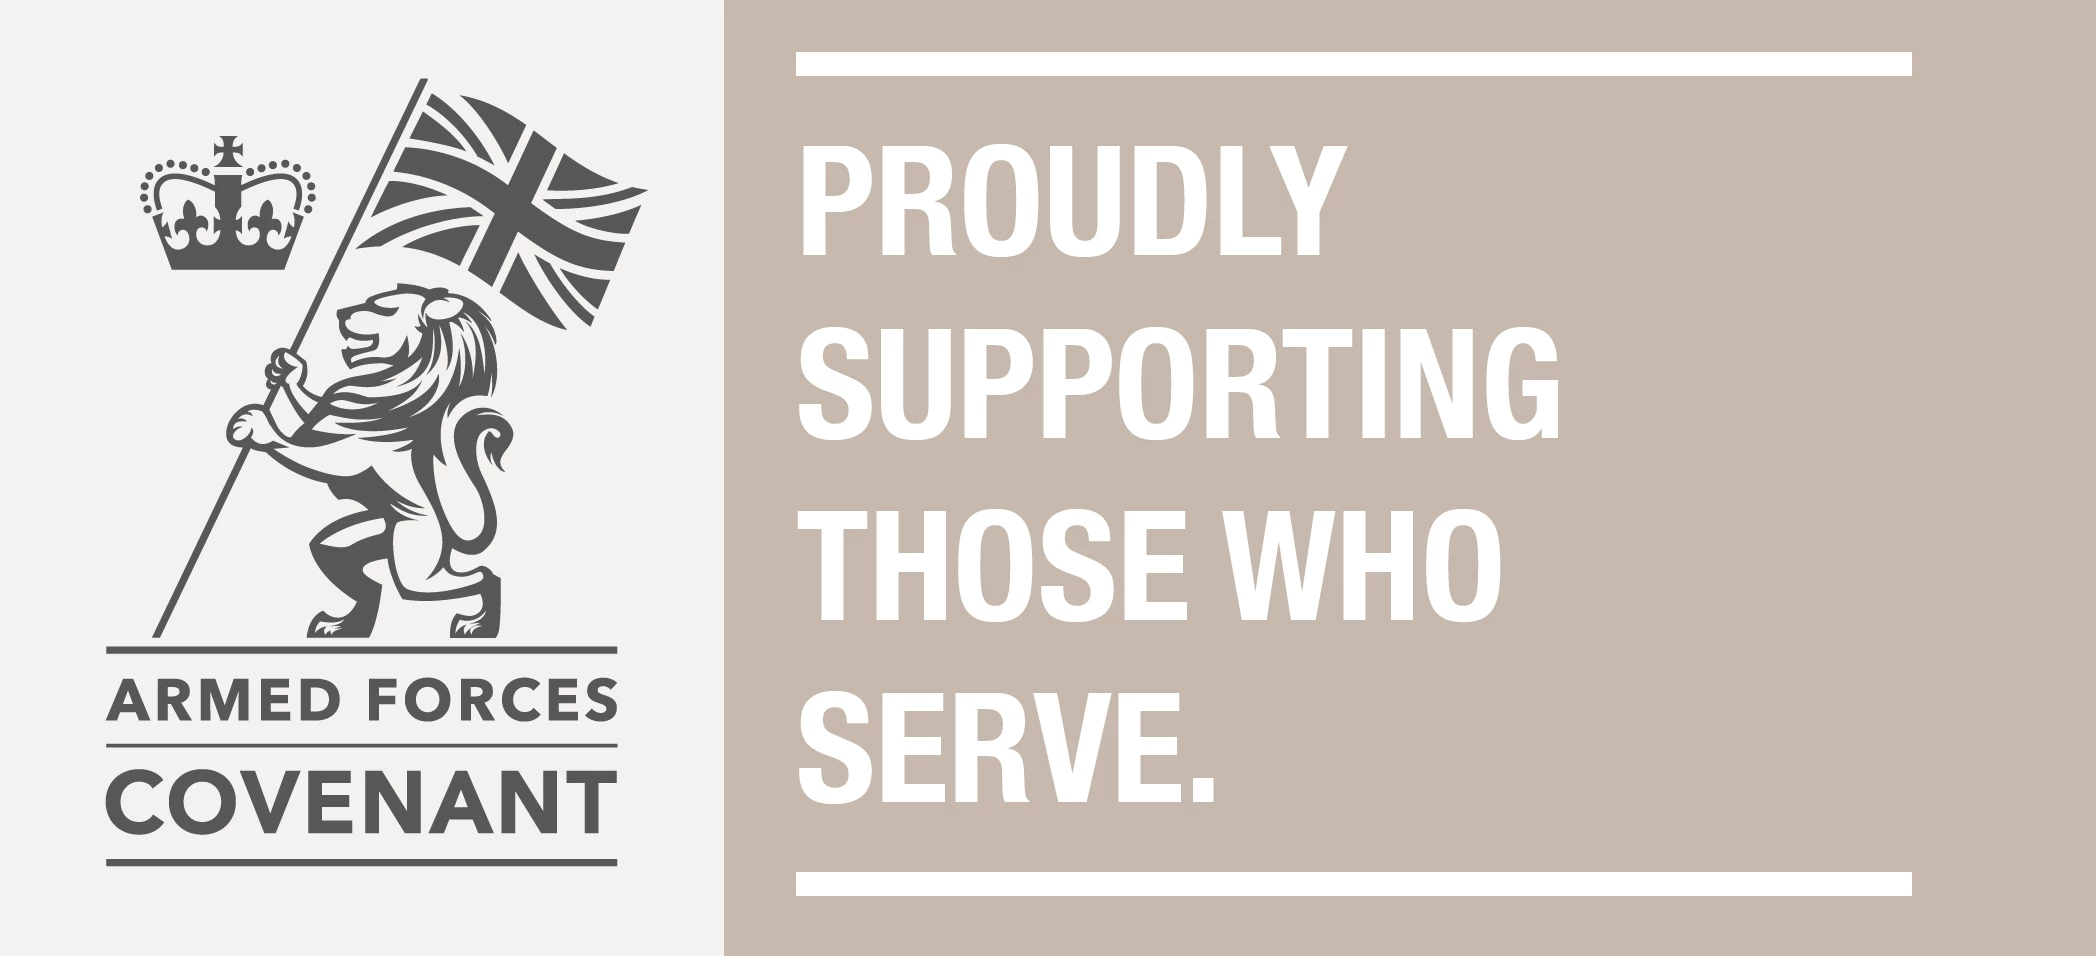 Armed Forces Covenant – Proudly supporting those who serve